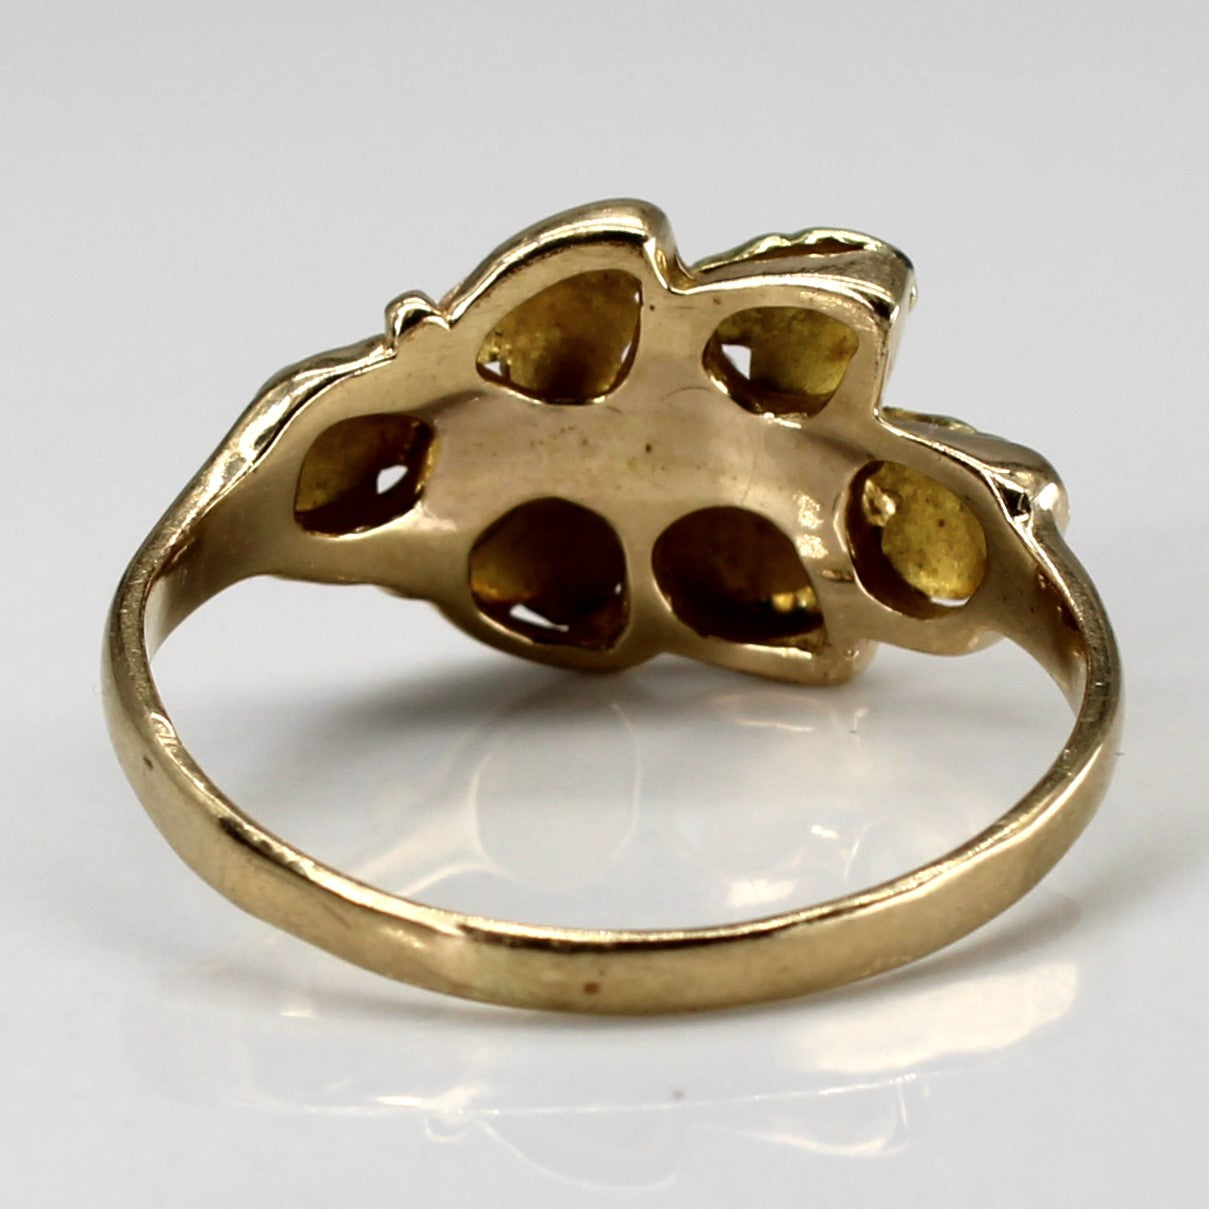 Two Tone Gold Leaves Design Ring | SZ 10 |